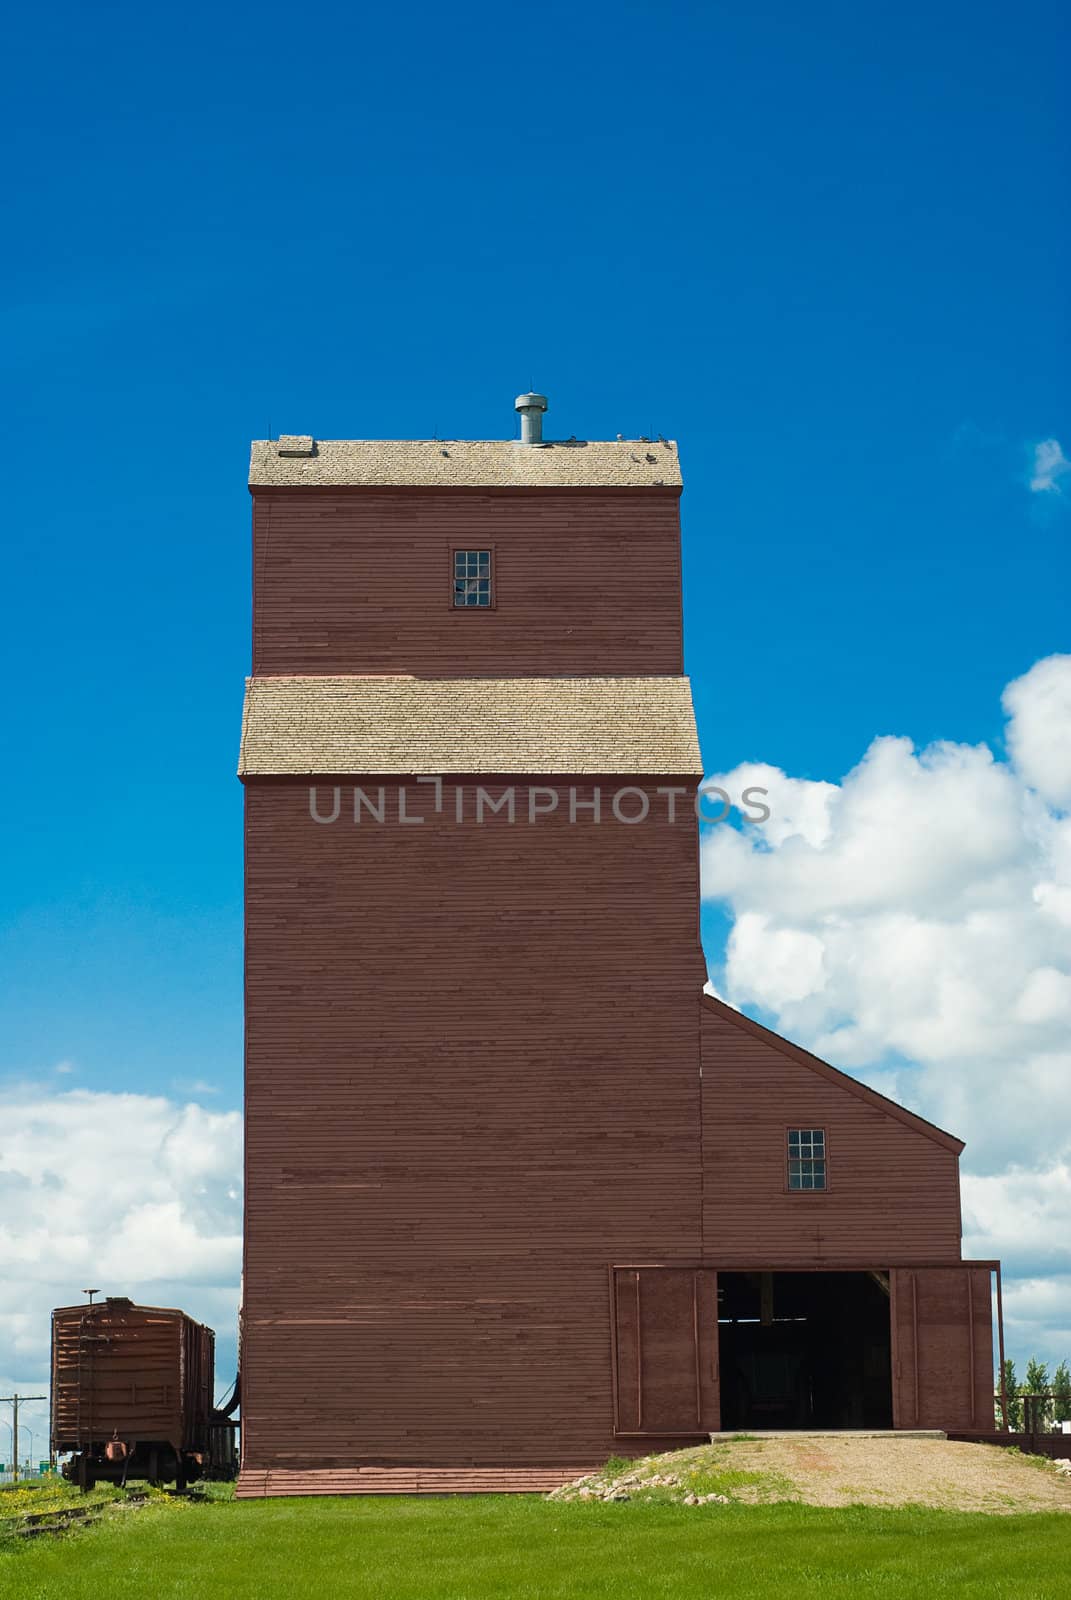 A Saskatchewan grain elevator with the bay doors open and a train parked beside it, shot on a partly cloudy day, with blue copy space above